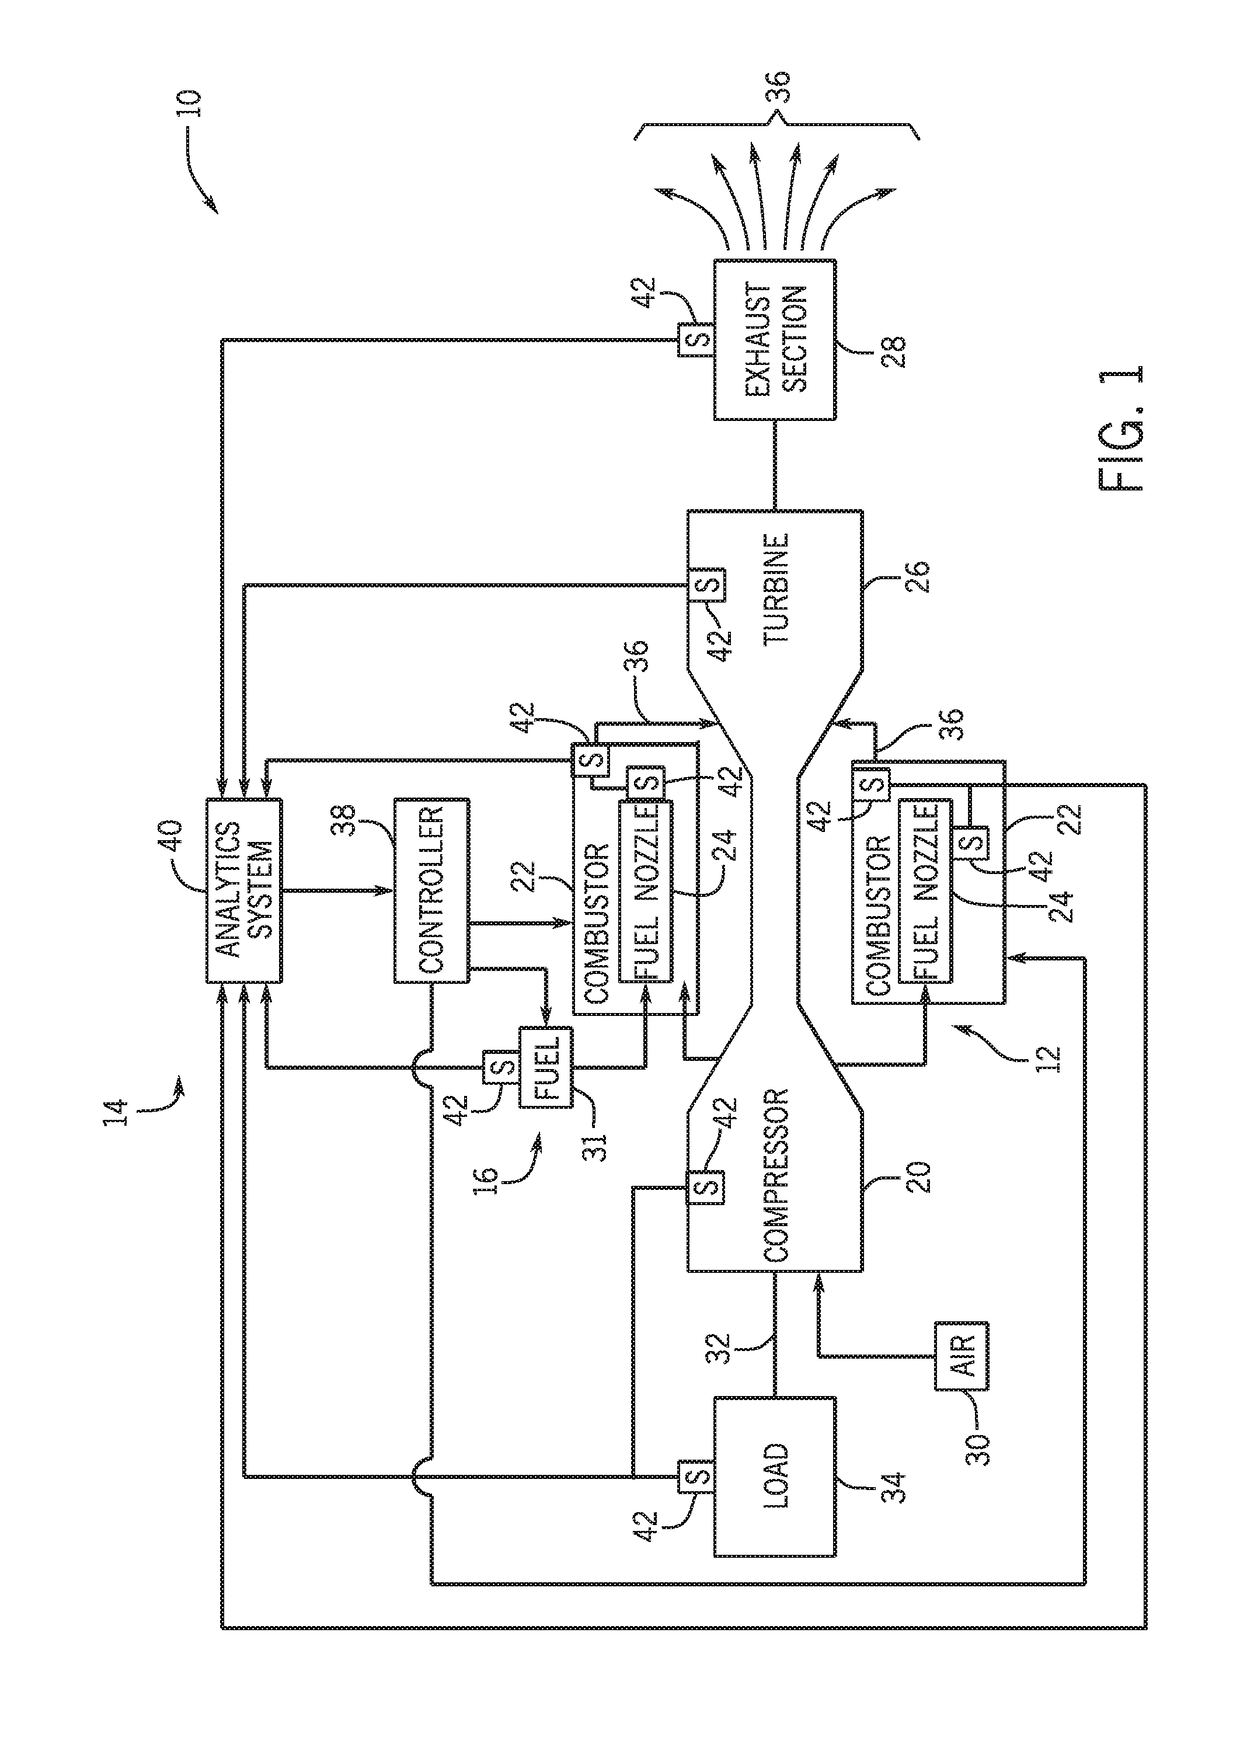 Neural network for combustion system flame detection